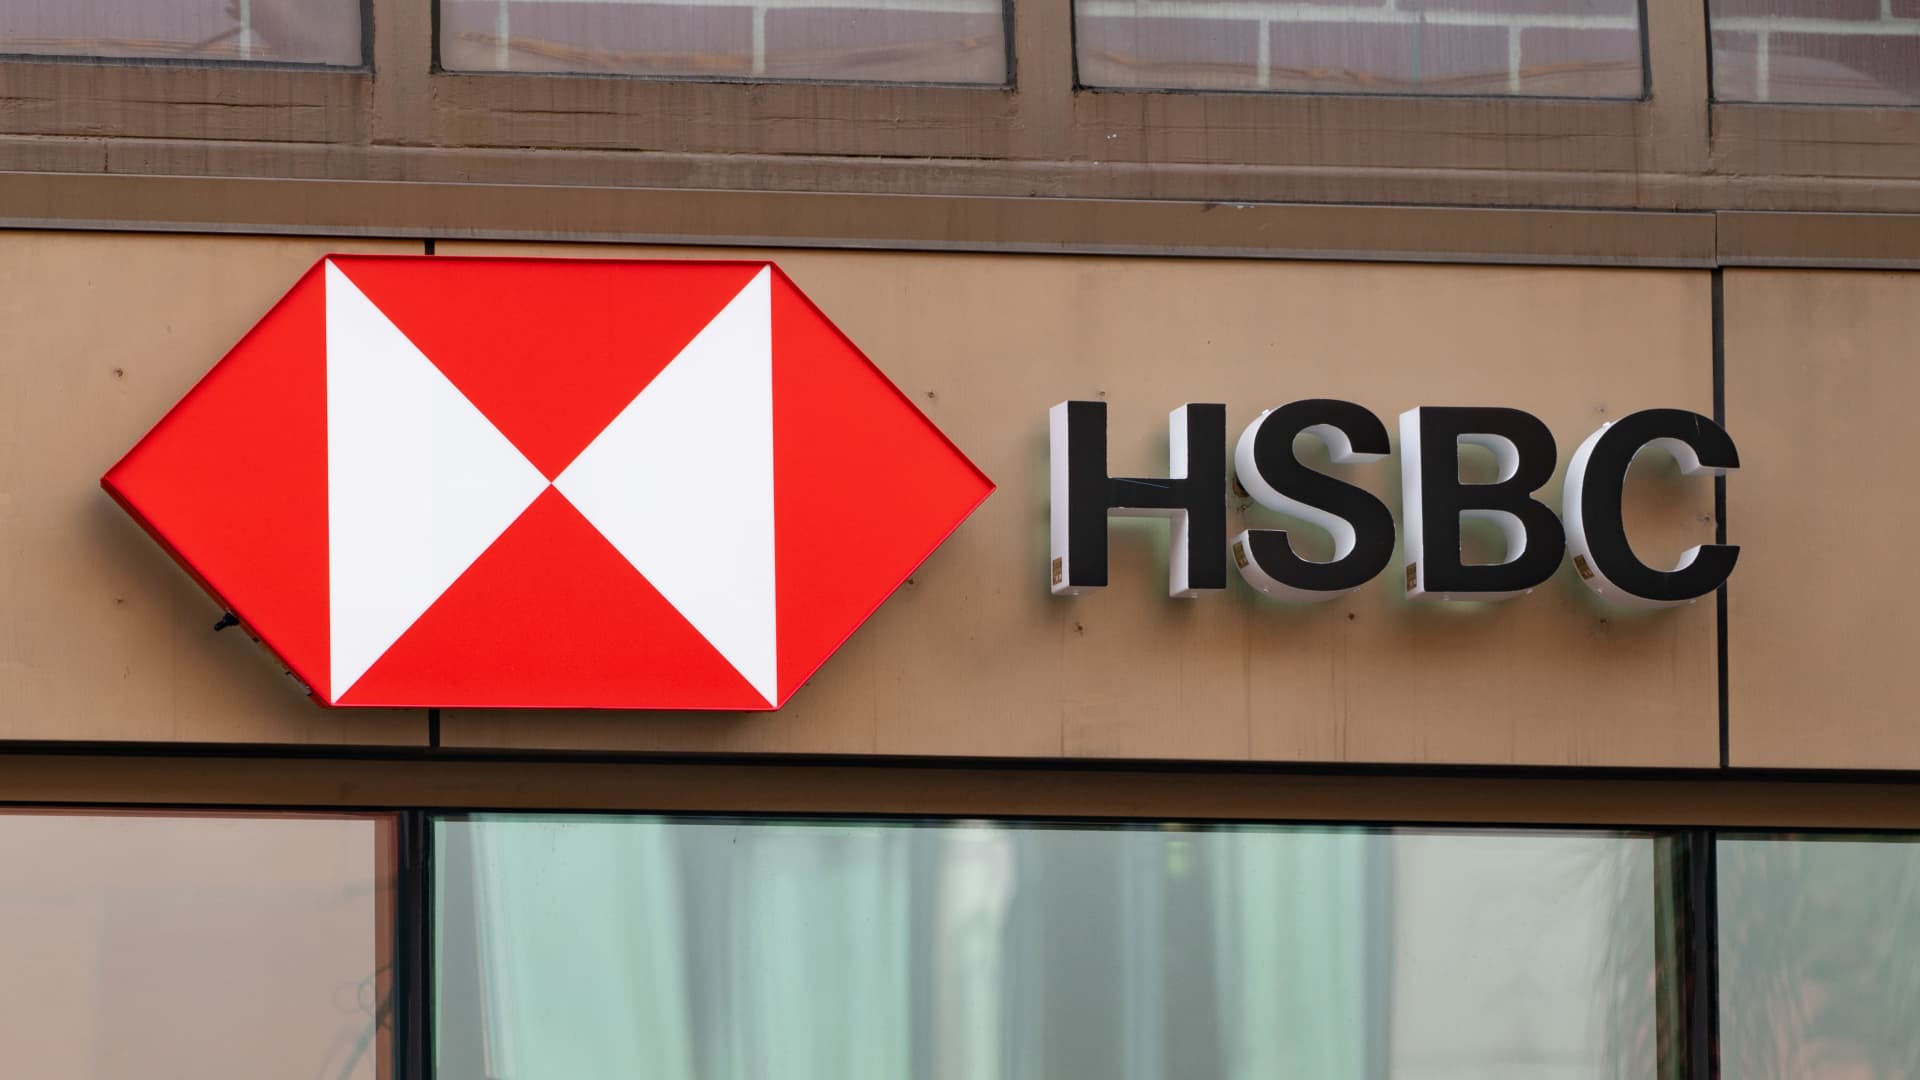 HSBC sees limited stock market gains after record-setting rally, tells investors to wait for a better entry point